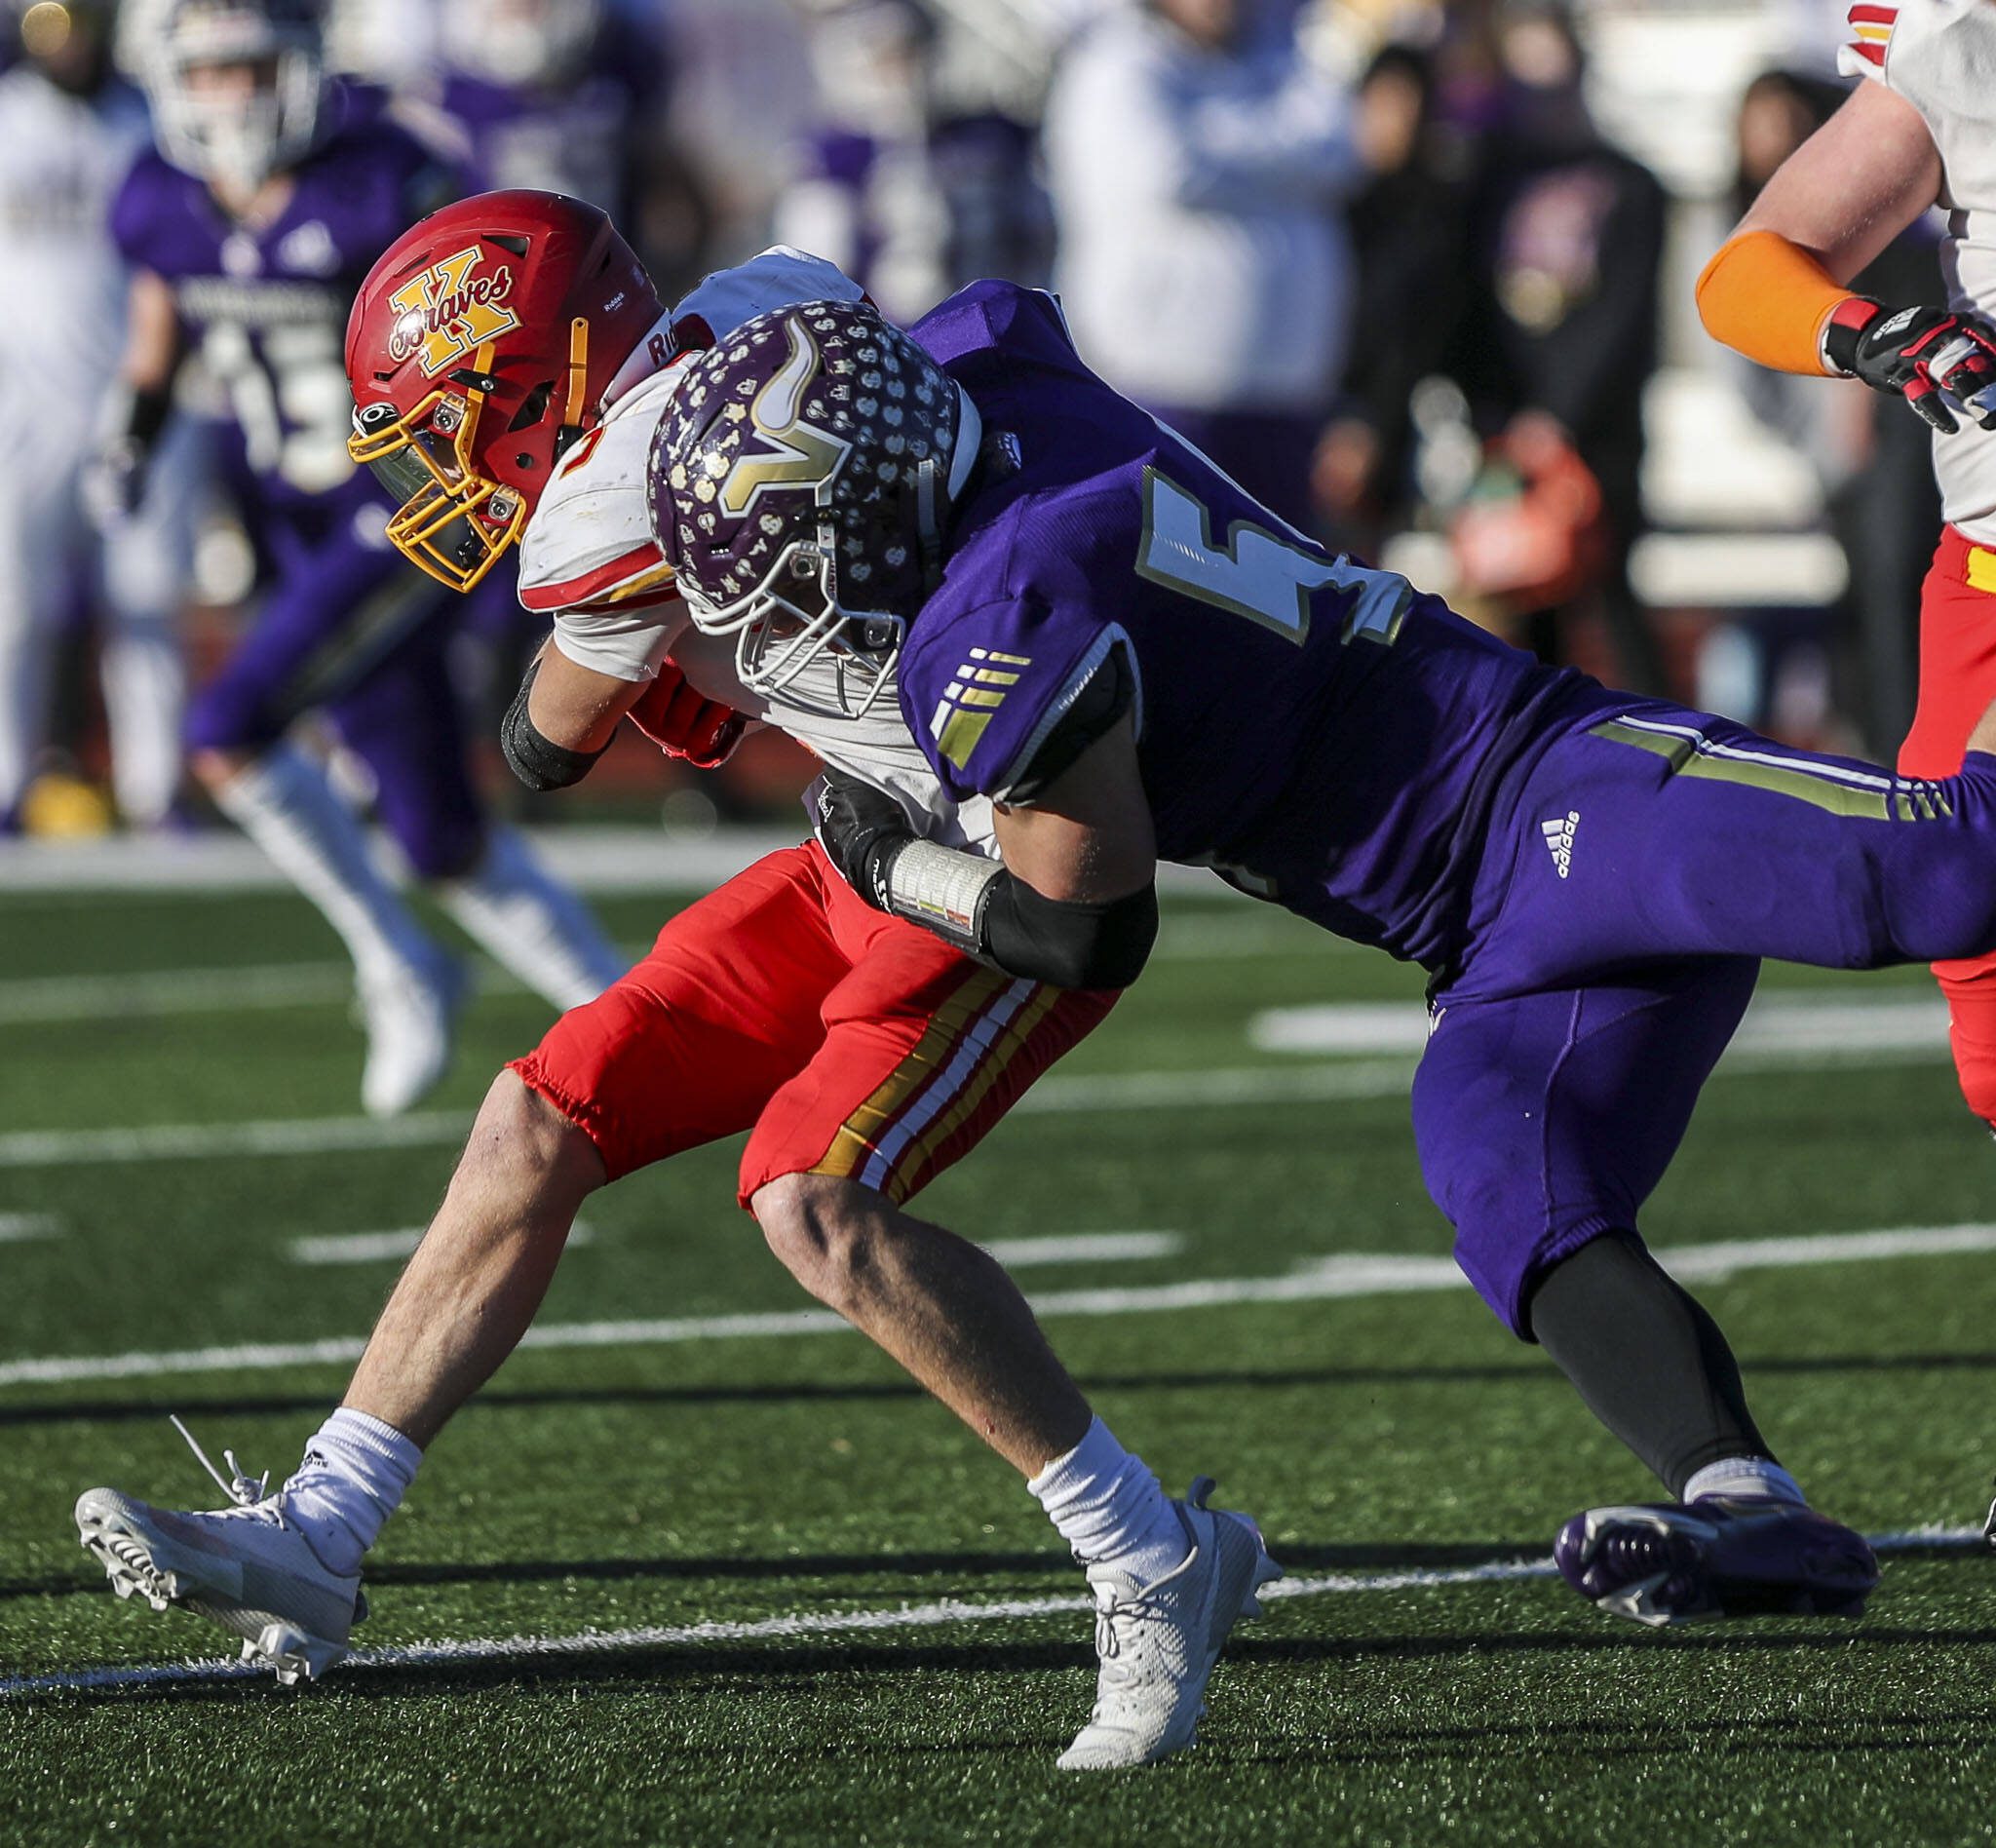 Lake Stevens’ Mason Turner (54) tackles during a Class 4A state semifinal game against Kamiakin on Saturday in Lake Stevens. Lake Stevens won 48-7. (Annie Barker / The Herald)